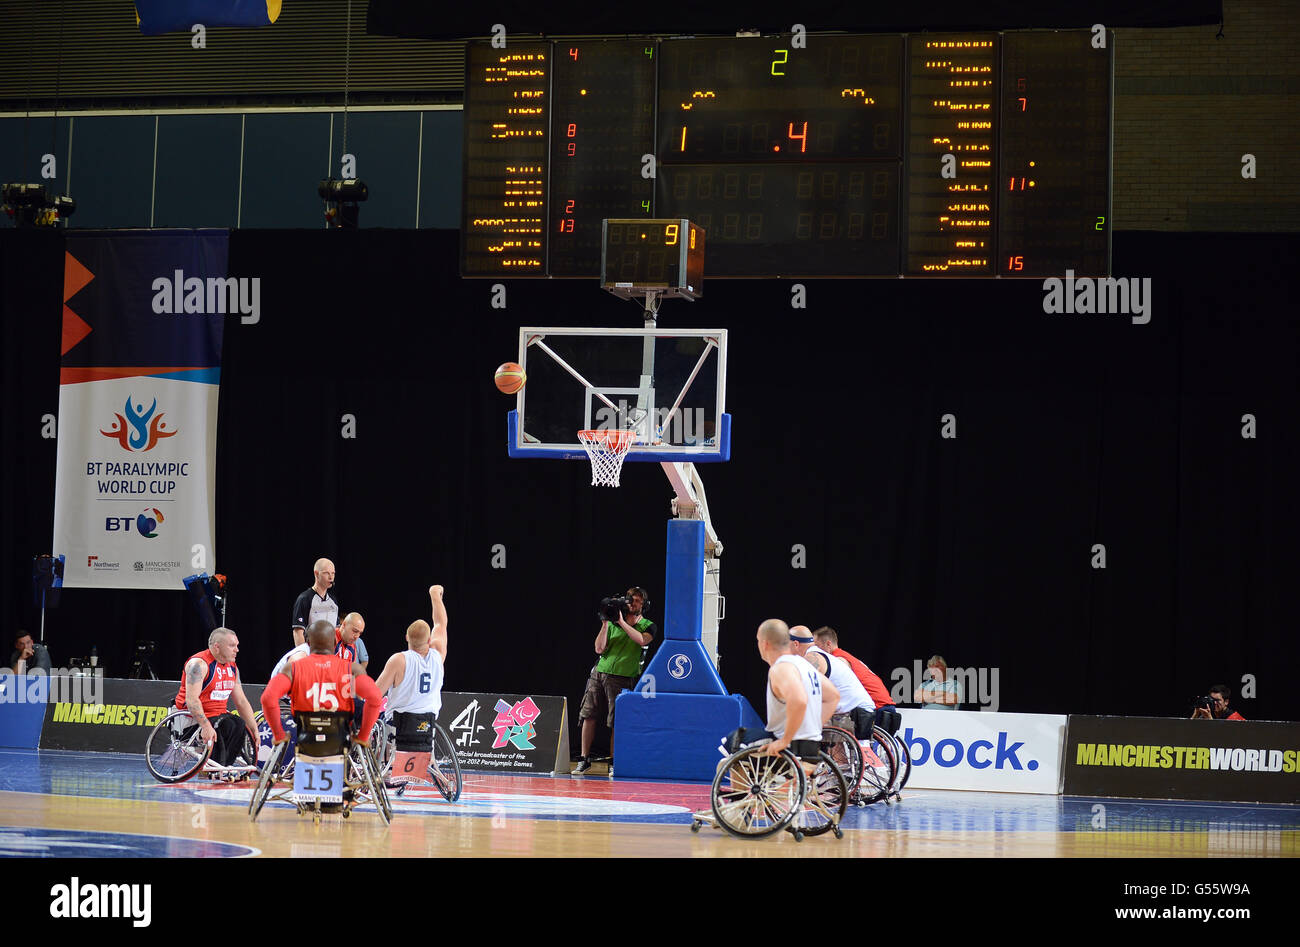 Sport - 2012 BT Paralympic World Cup - Day Three - Manchester Regional Arena. General view of match action from the Men's Wheelchair basketball match between USA and Great Britain Stock Photo